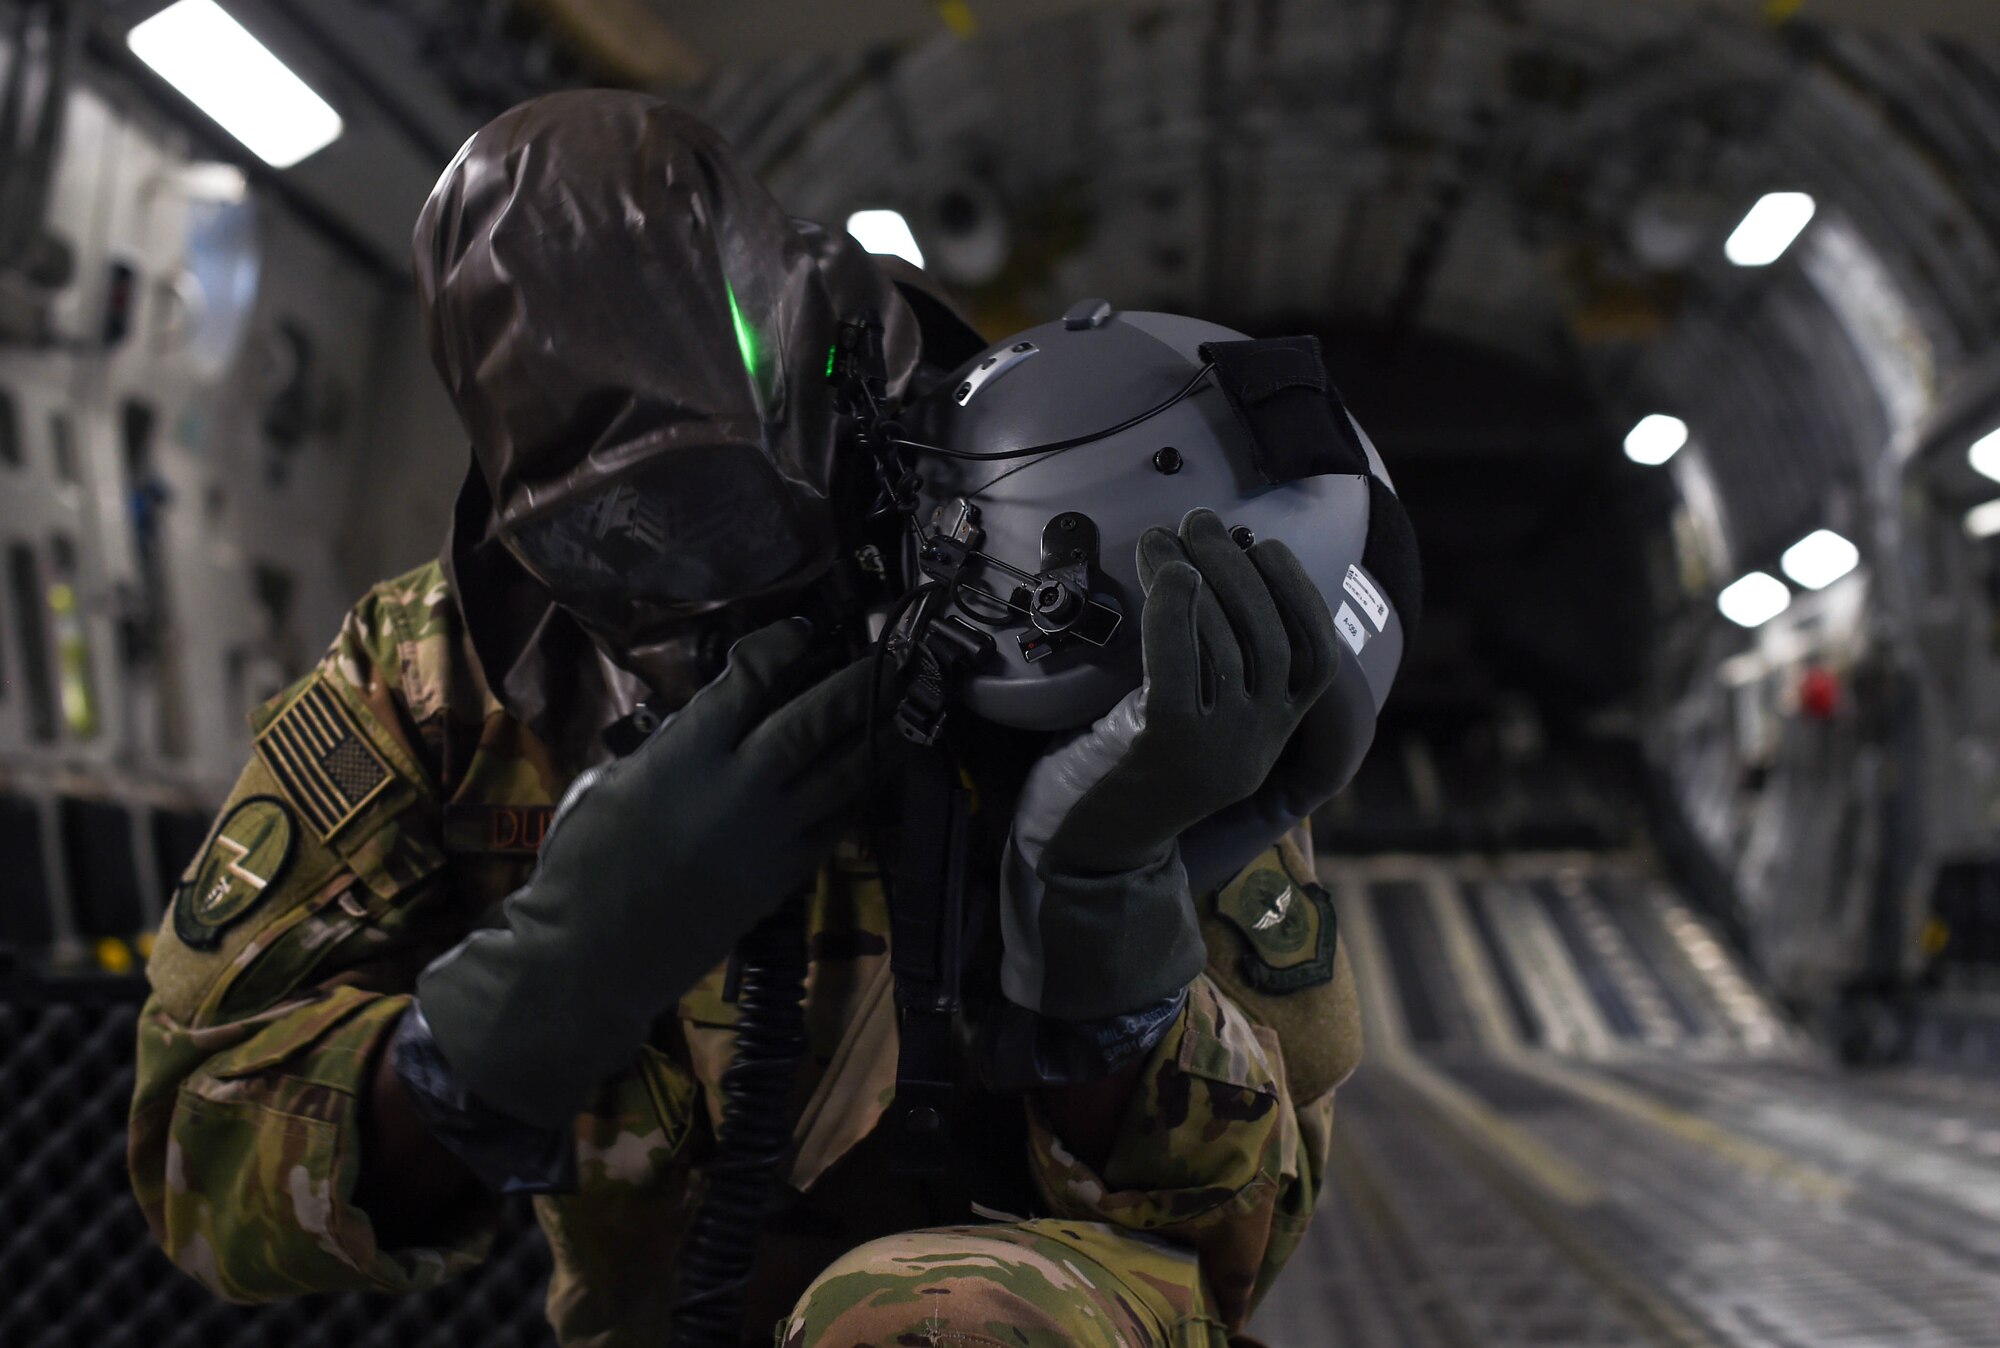 First Lt. Edmund Duvall, 7th Airlift Squadron pilot, removes an aircrew eye and respiratory protection system (AERPS) while flying in a C-17 Globemaster III during Exercise Rainier War near Moses Lake, Wash., June 6, 2018. The crew’s ability to put on AERPS gear properly was one aspect they trained on during the exercise. (U.S. Air Force photo by Senior Airman Tryphena Mayhugh)